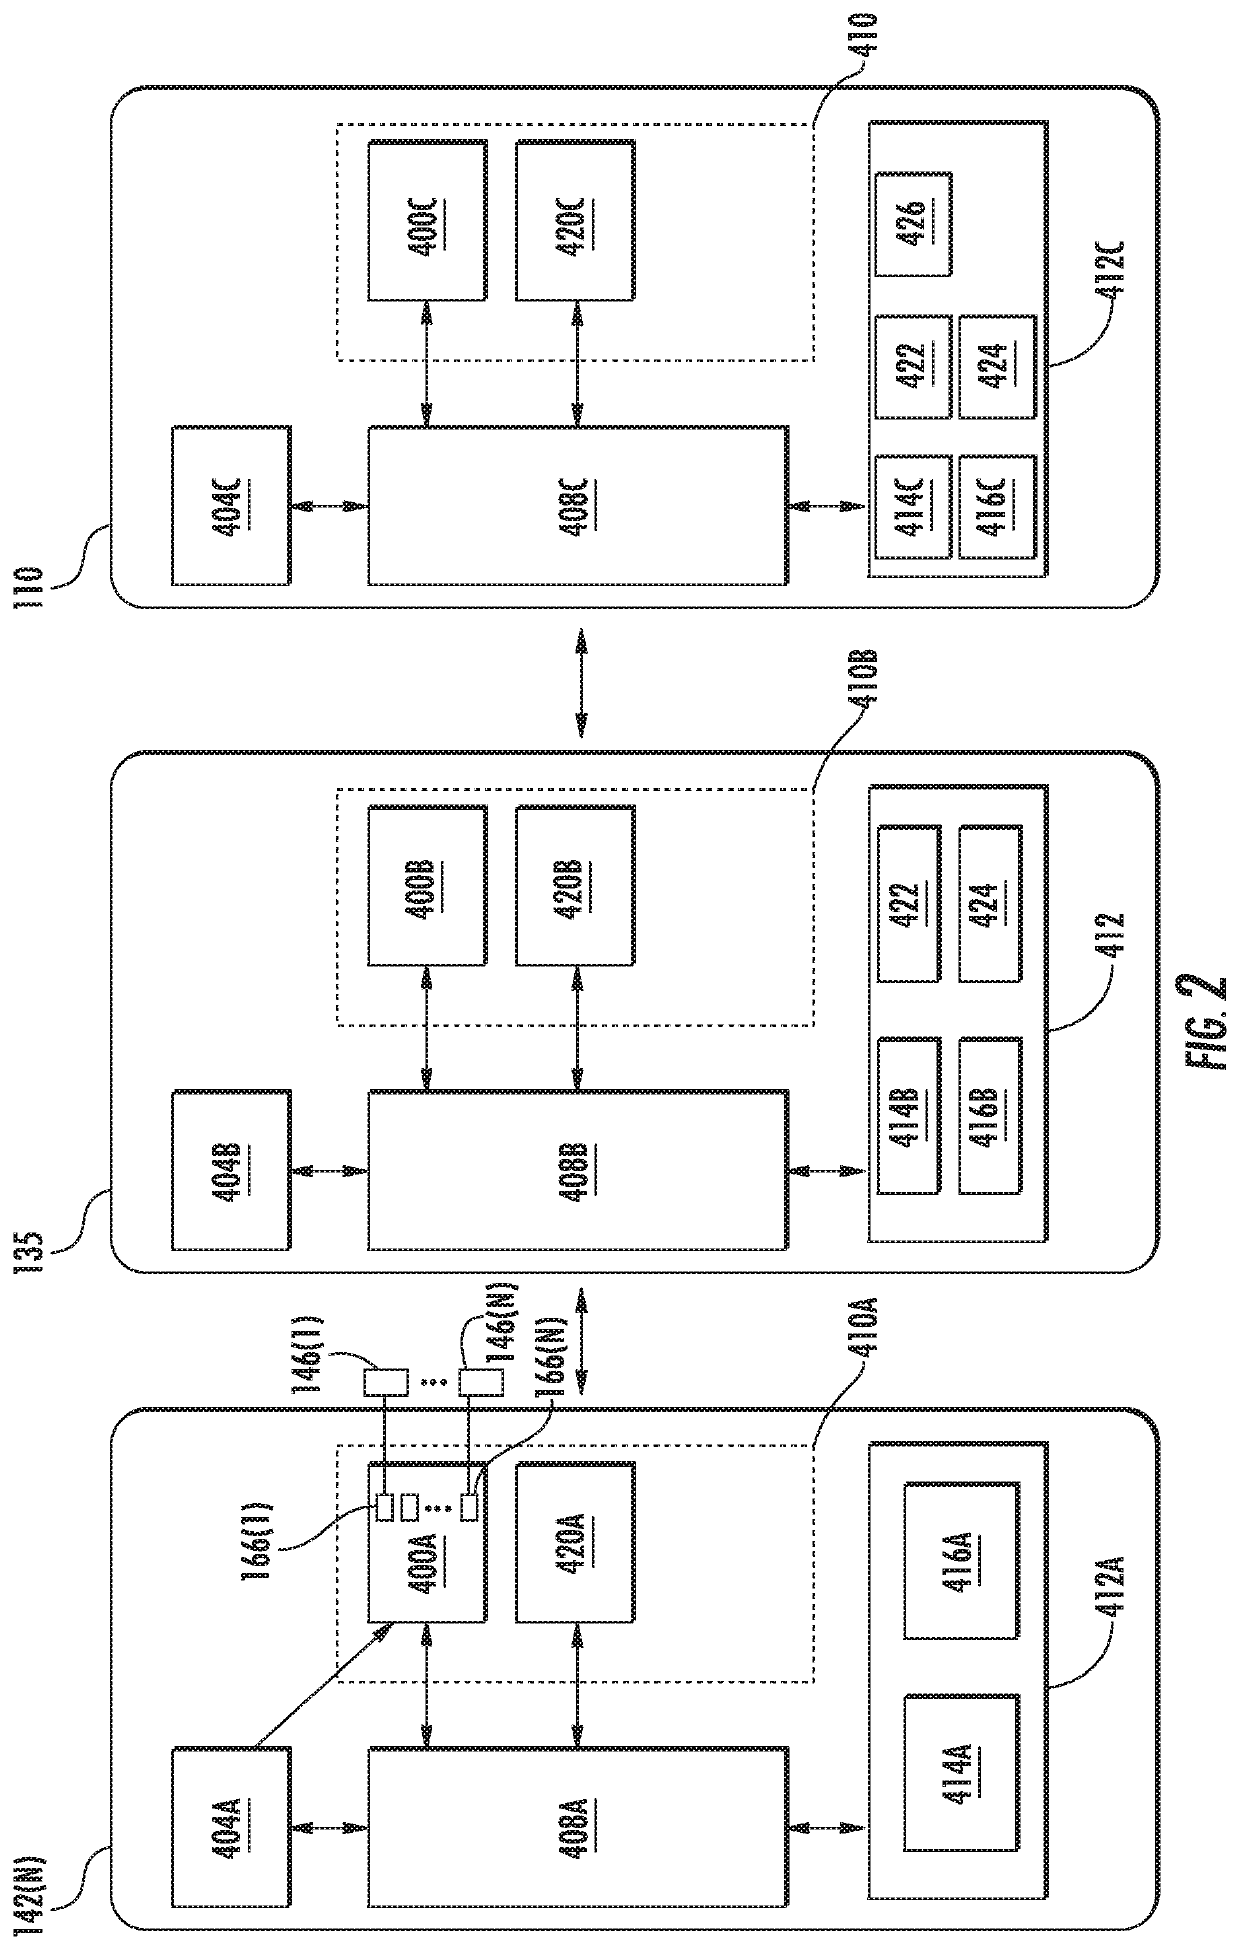 Patient care systems employing control devices to identify and configure sensor devices for patients